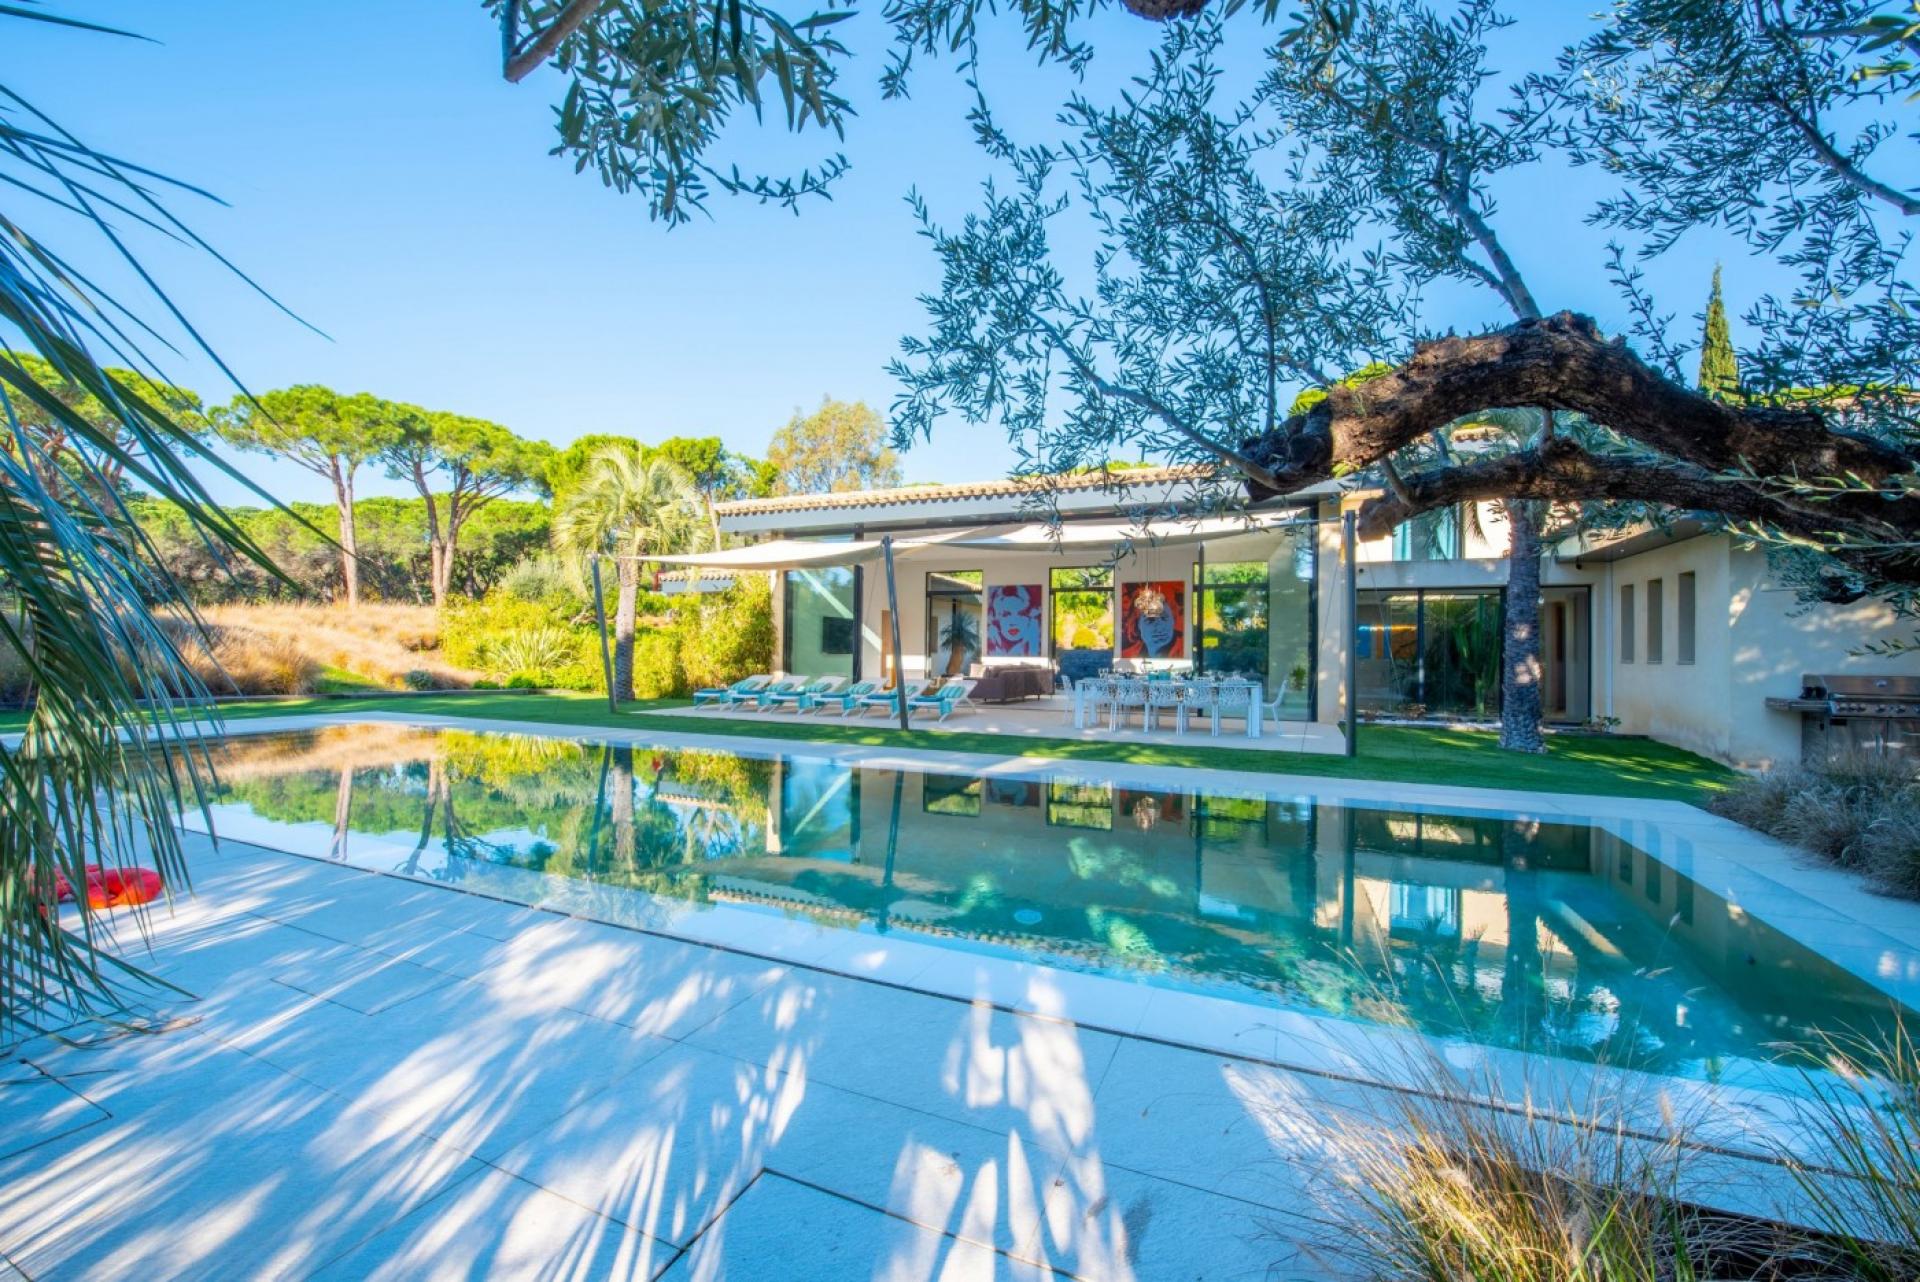 A BEAUTIFUL HOLIDAY VILLA CLOSE TO PAMPELONNE BEACH IN ST TROPEZ